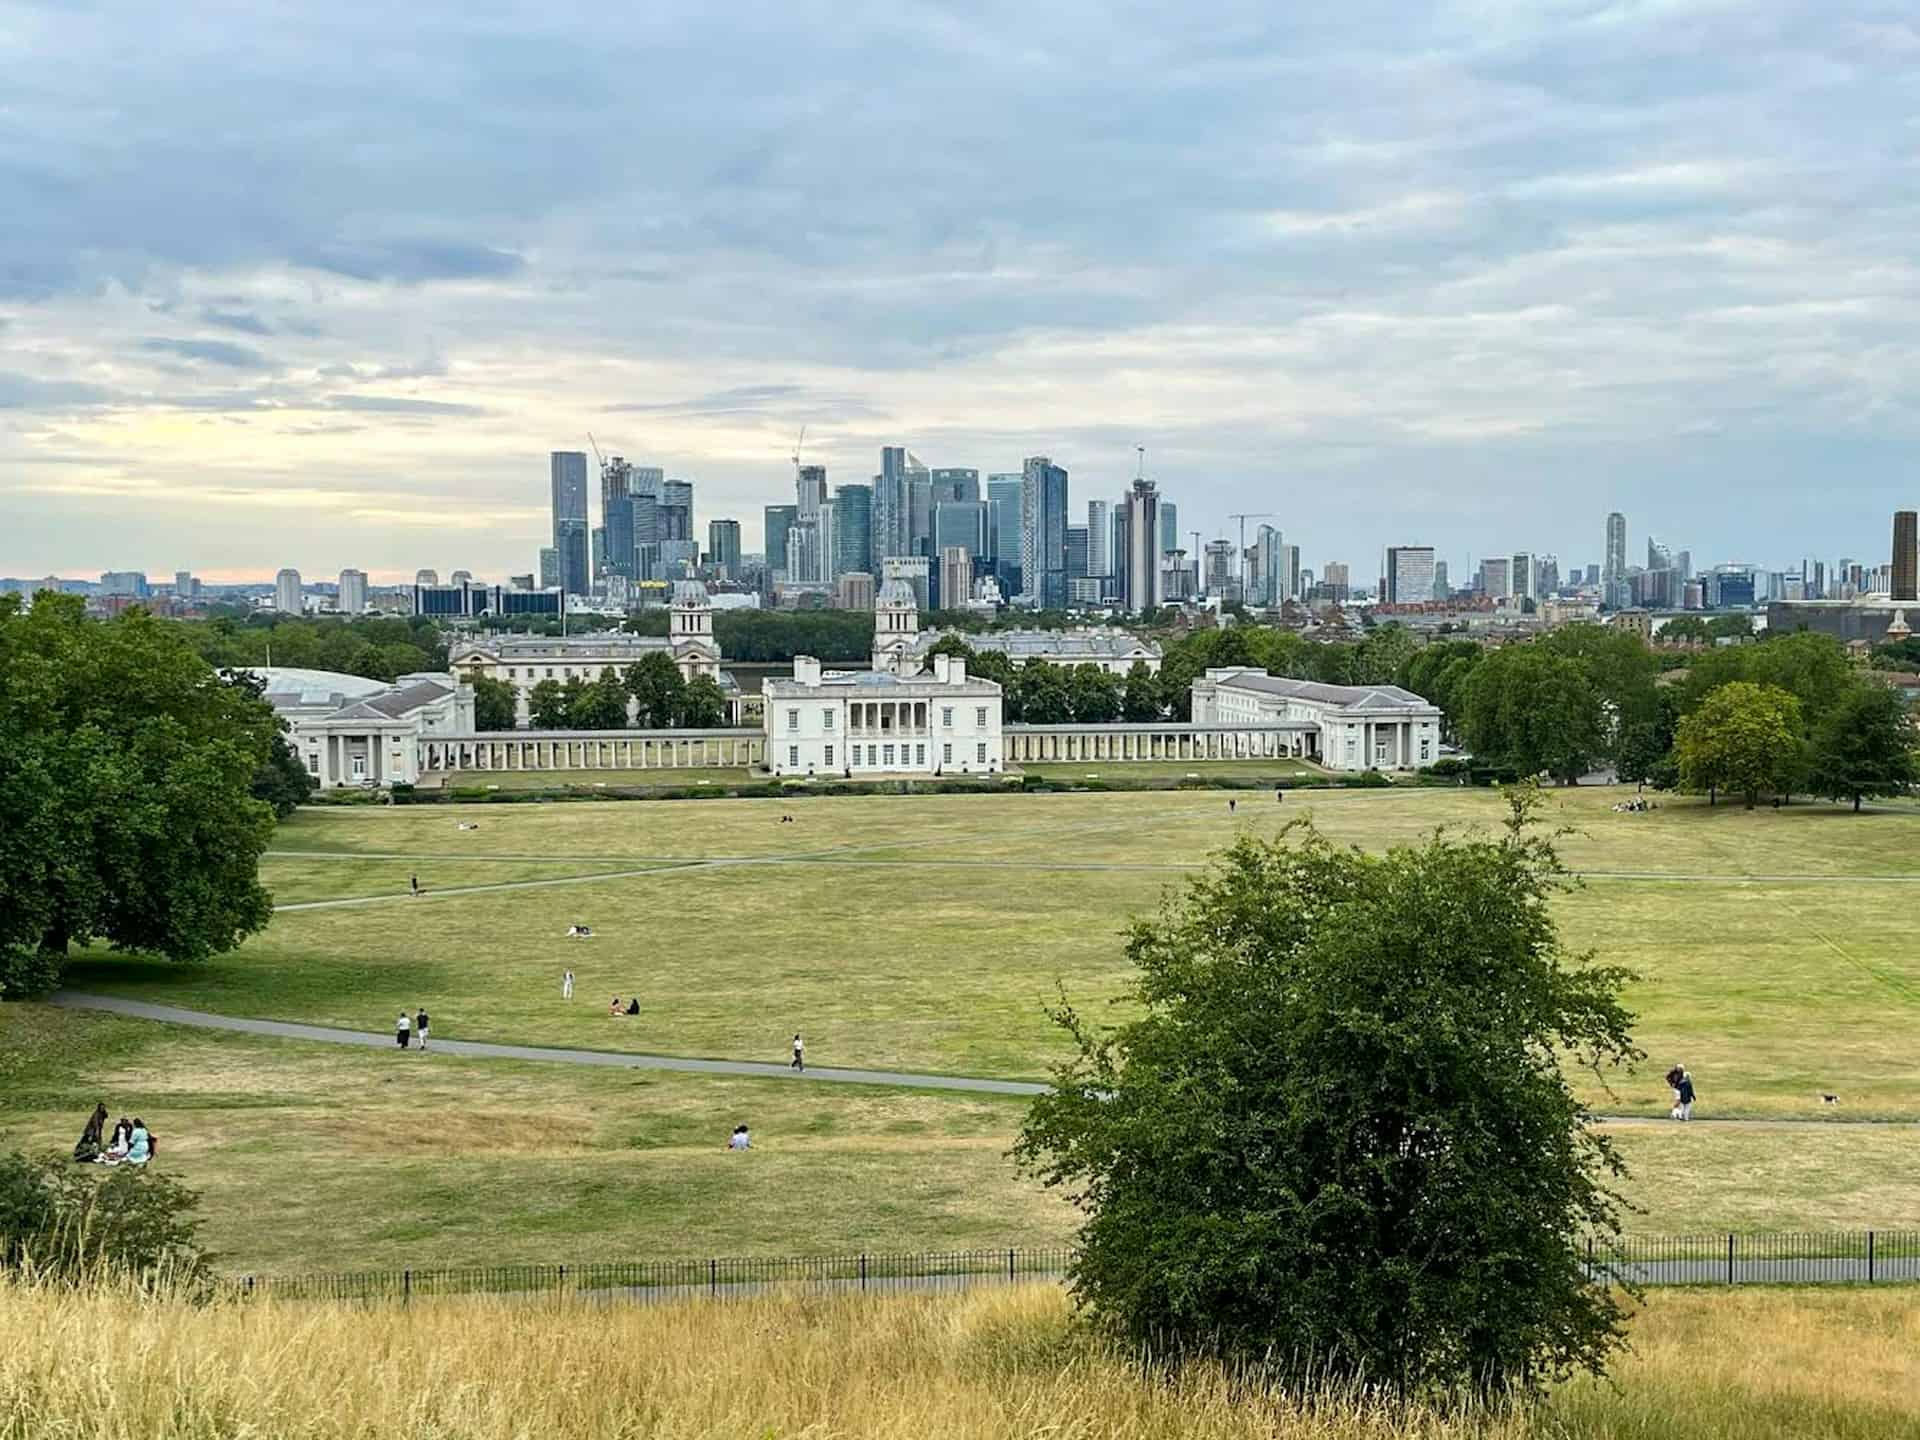 a view of a city skyline from a grassy field Greenwich park, UK